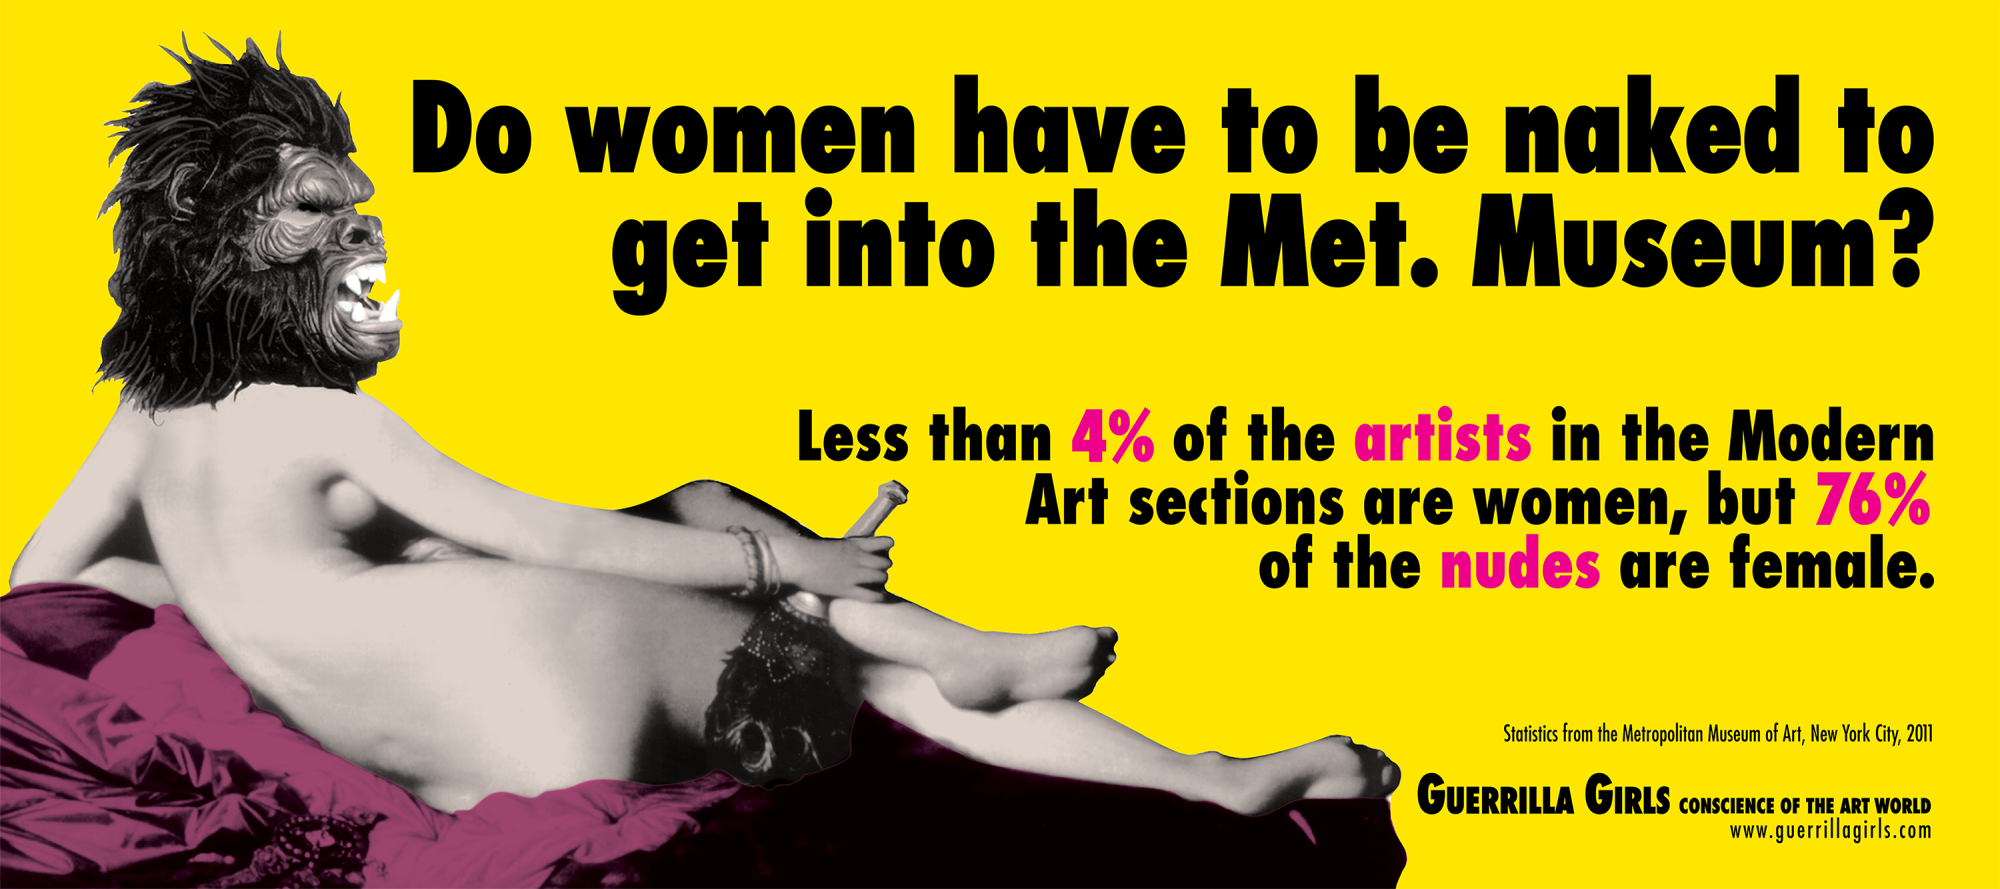 Guerrilla Girls, Do women have to be naked to get into the Met. Museum, 2012, Copyright © Guerrilla Girls, Courtesy guerrillagirls.com